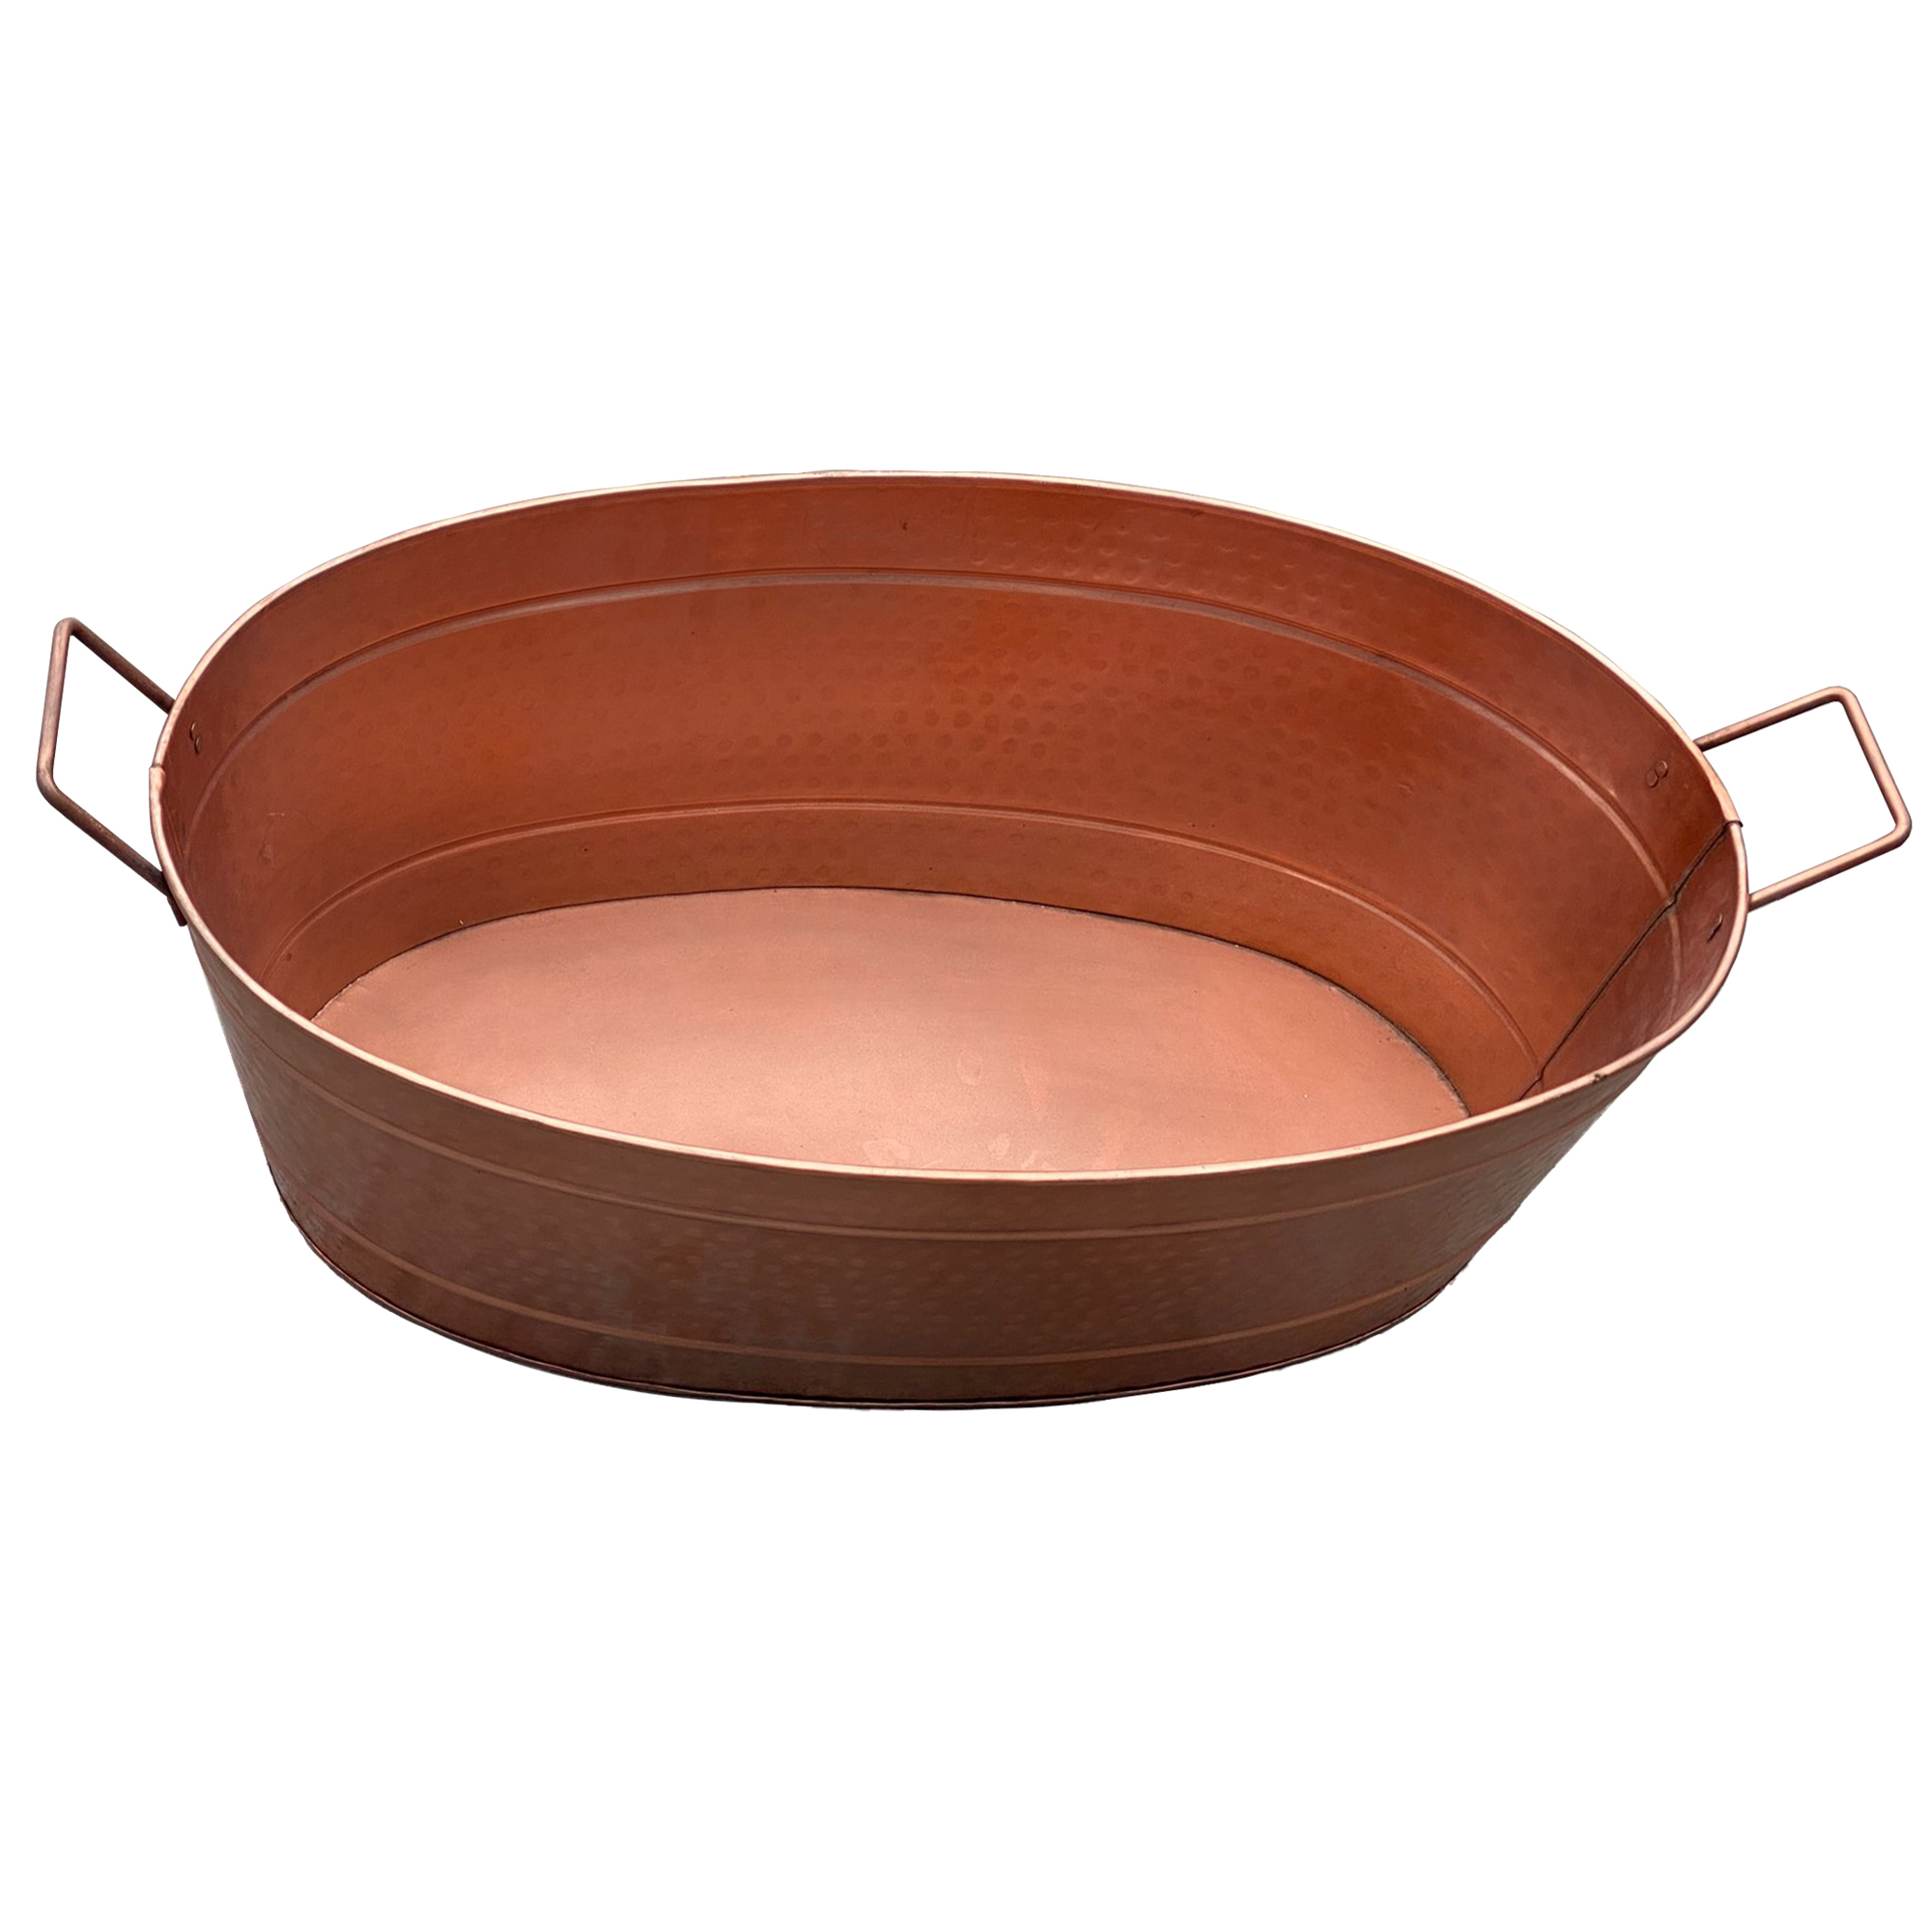 Oval Shape Hammered Texture Metal Tub With 2 Side Handles, Copper- Saltoro Sherpi